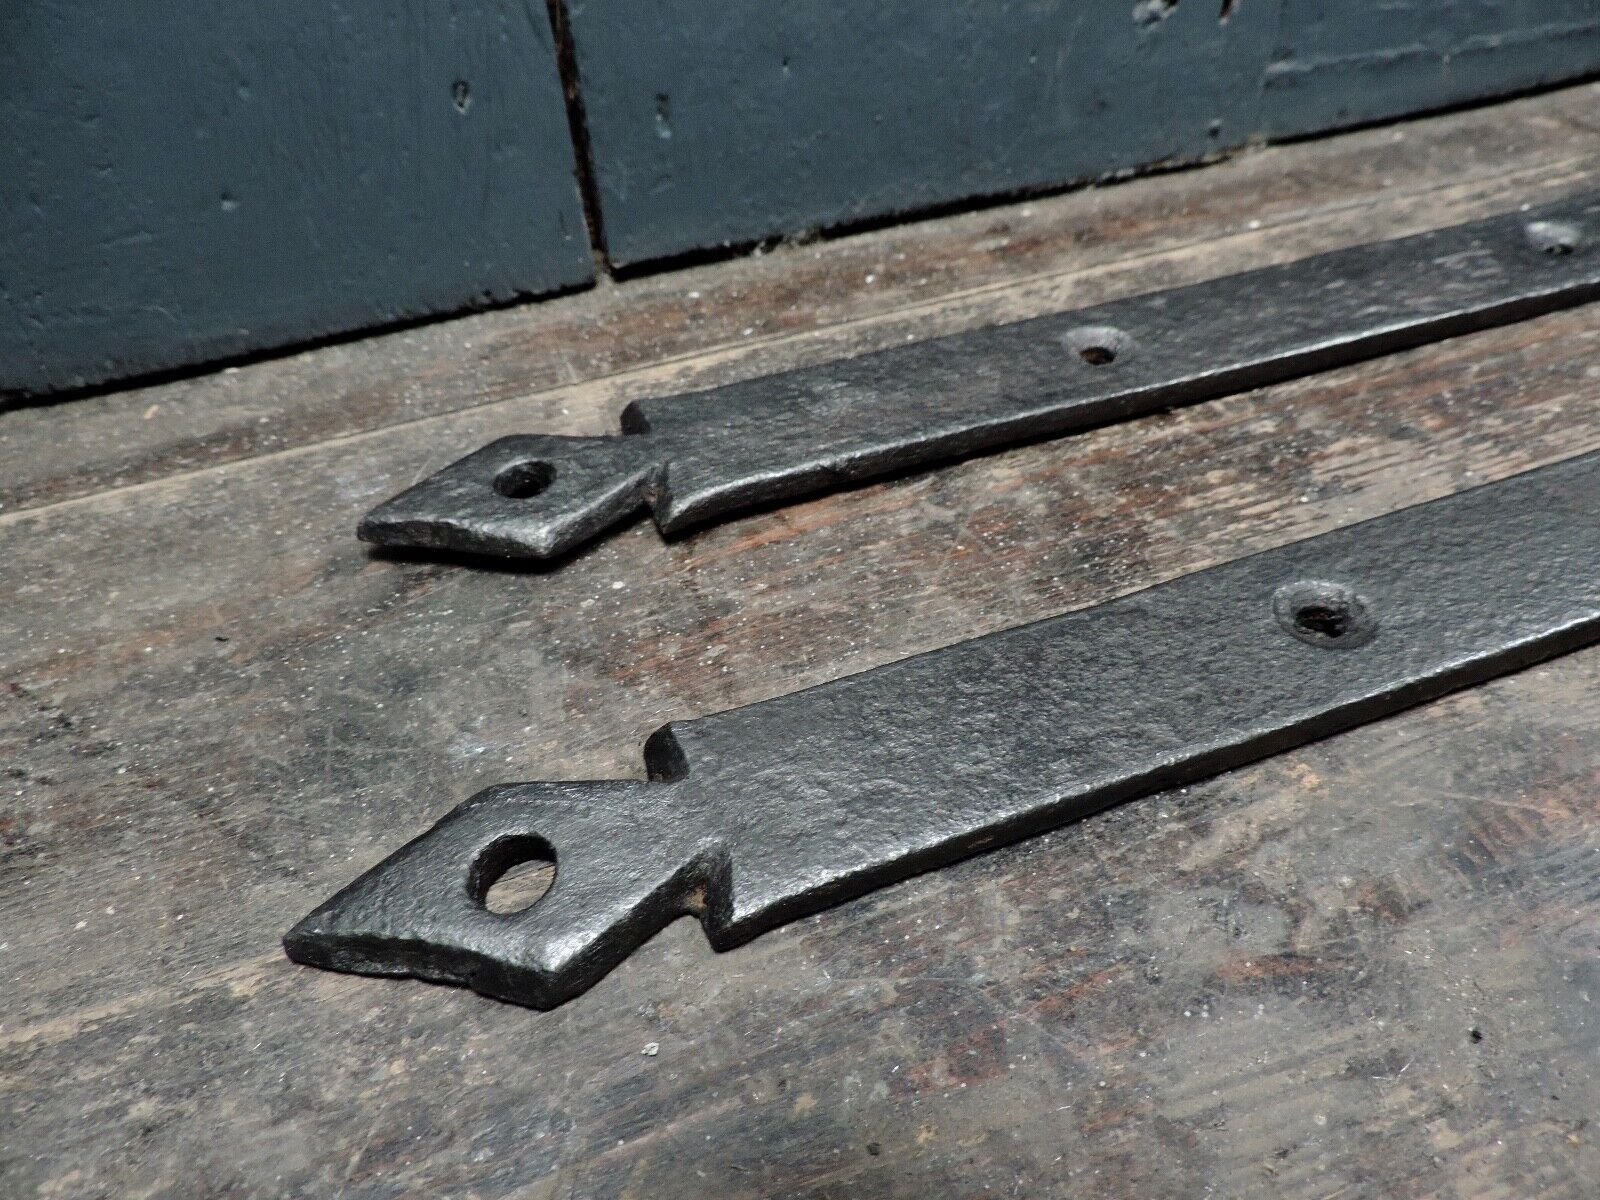 Reclaimed 18th Century Georgian Wrought Iron Strap Hinges From Ledged Door (R19)